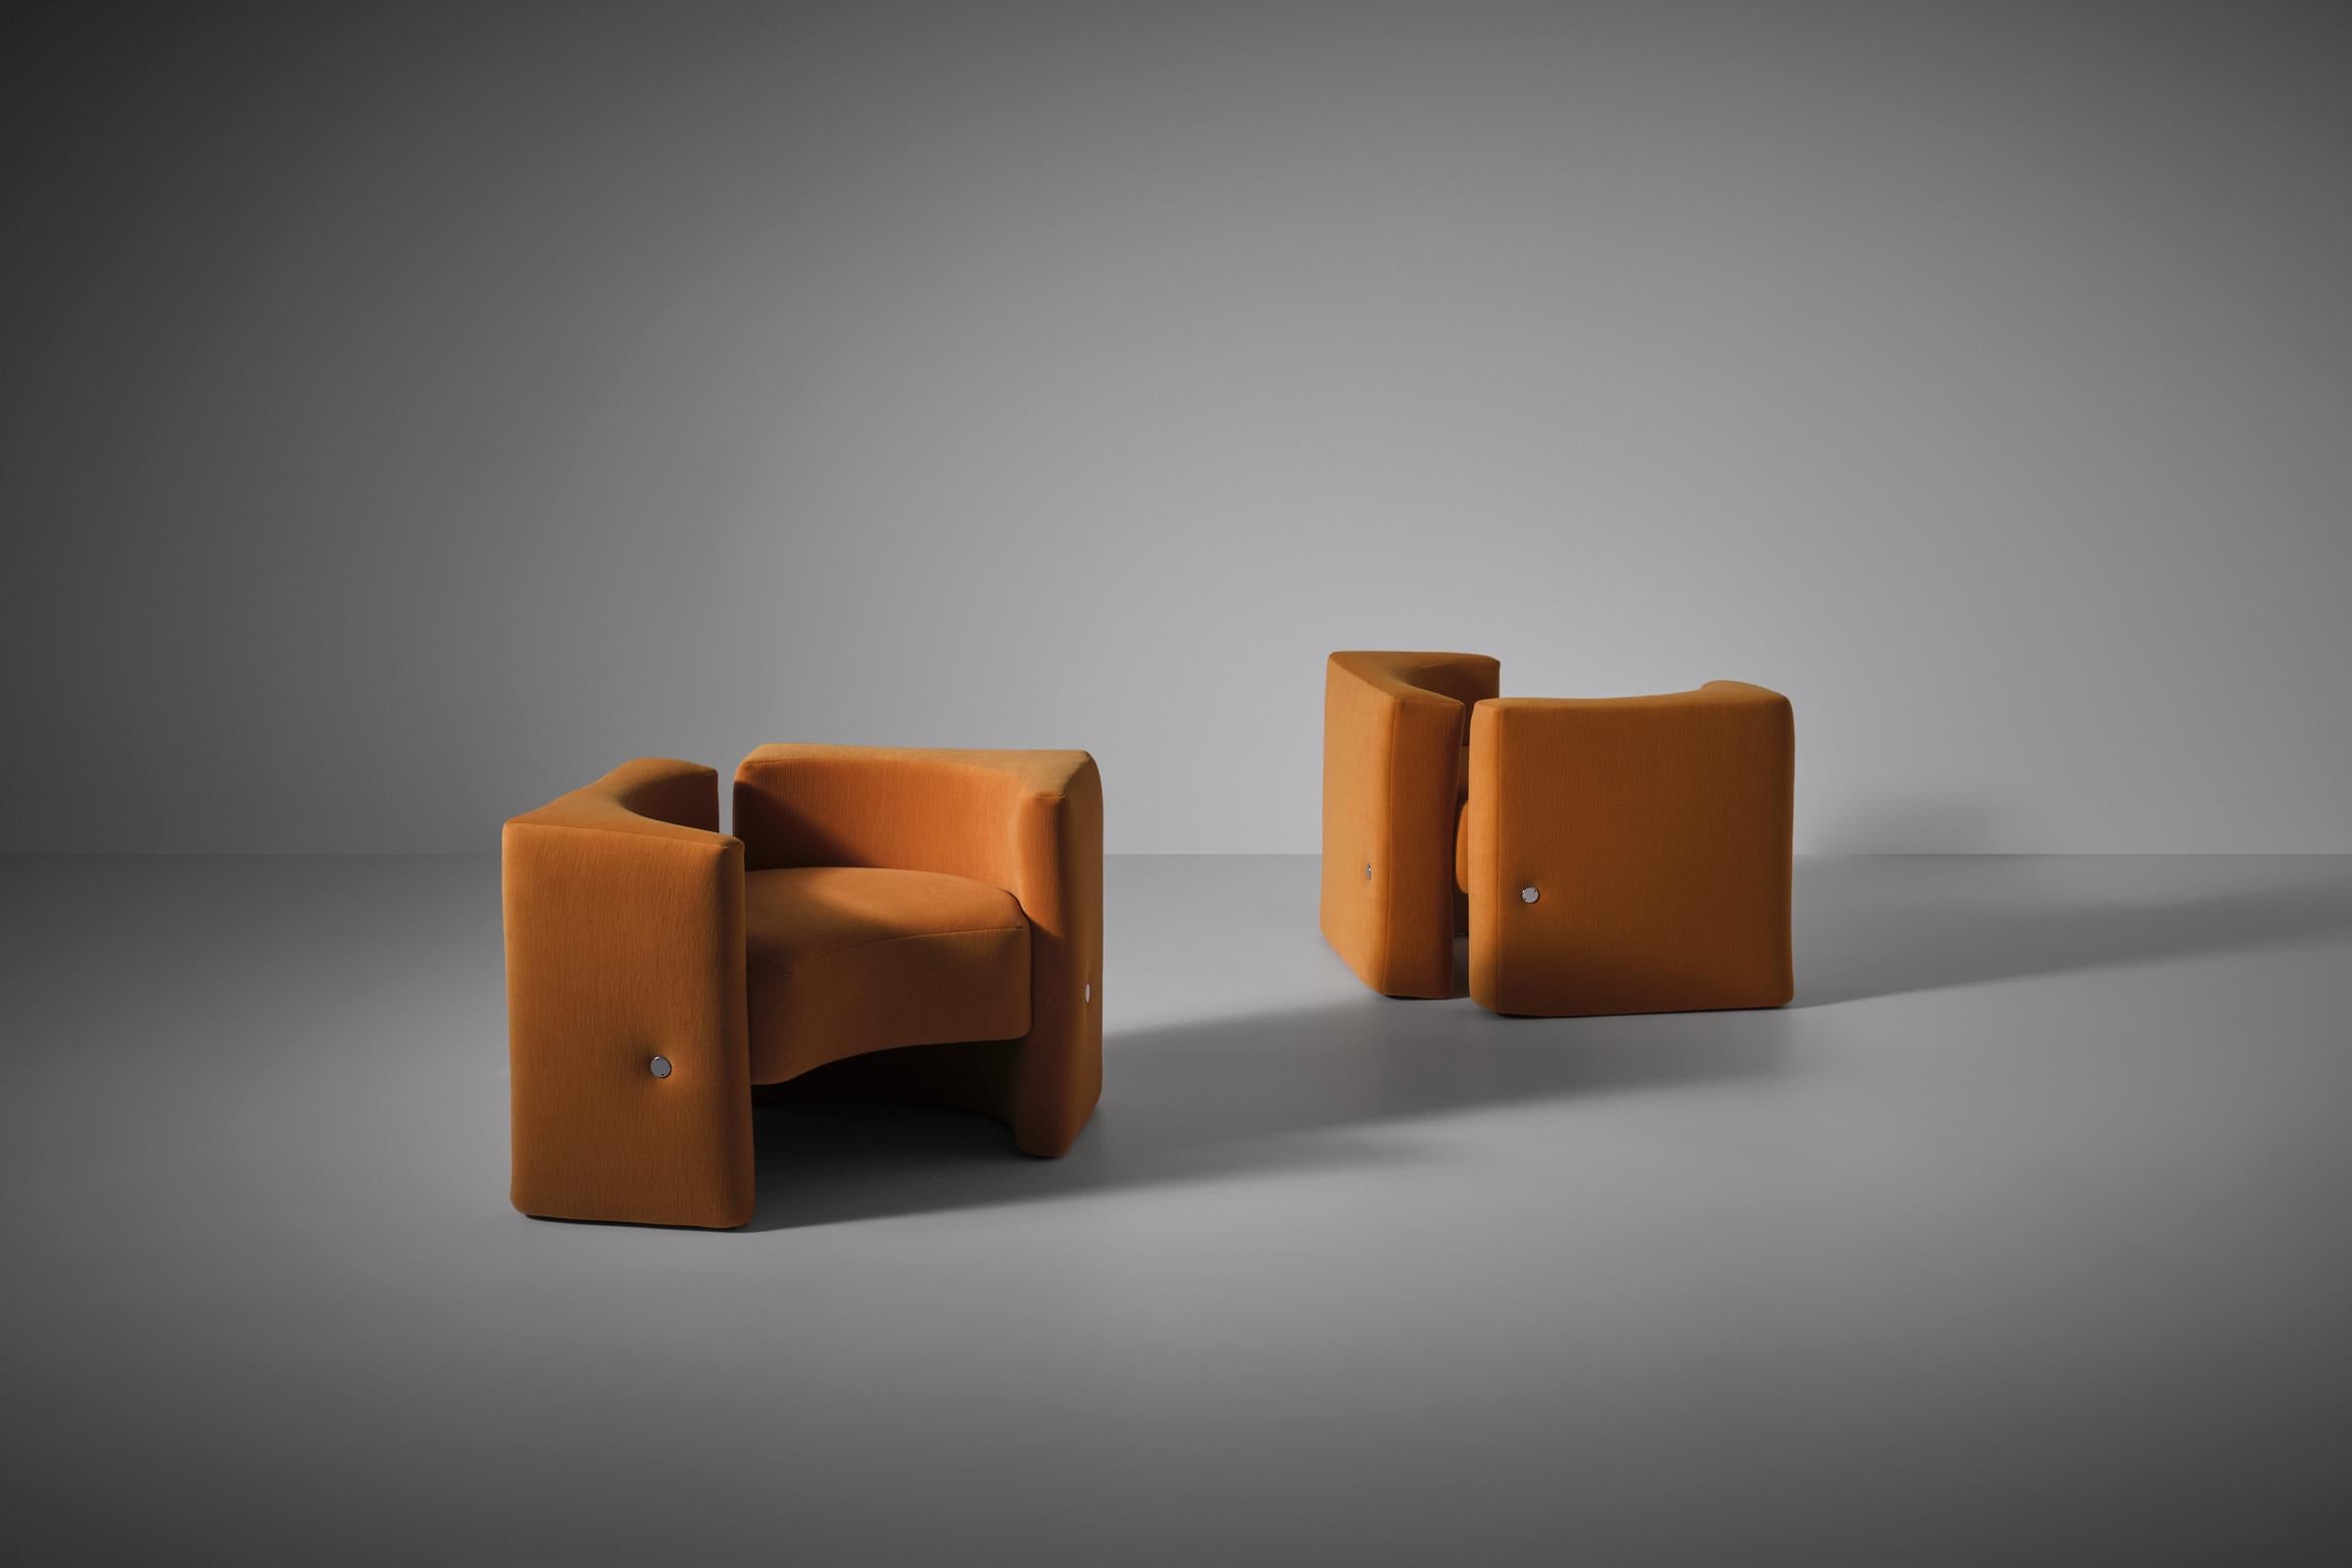 Pair of pentagonal shaped armchairs, Italy, 1960s. Unique outstanding design with interesting lines and curves. The chairs are reupholstered within the original specifications in a high quality woolen velvet in a stunning warm mango color. In very